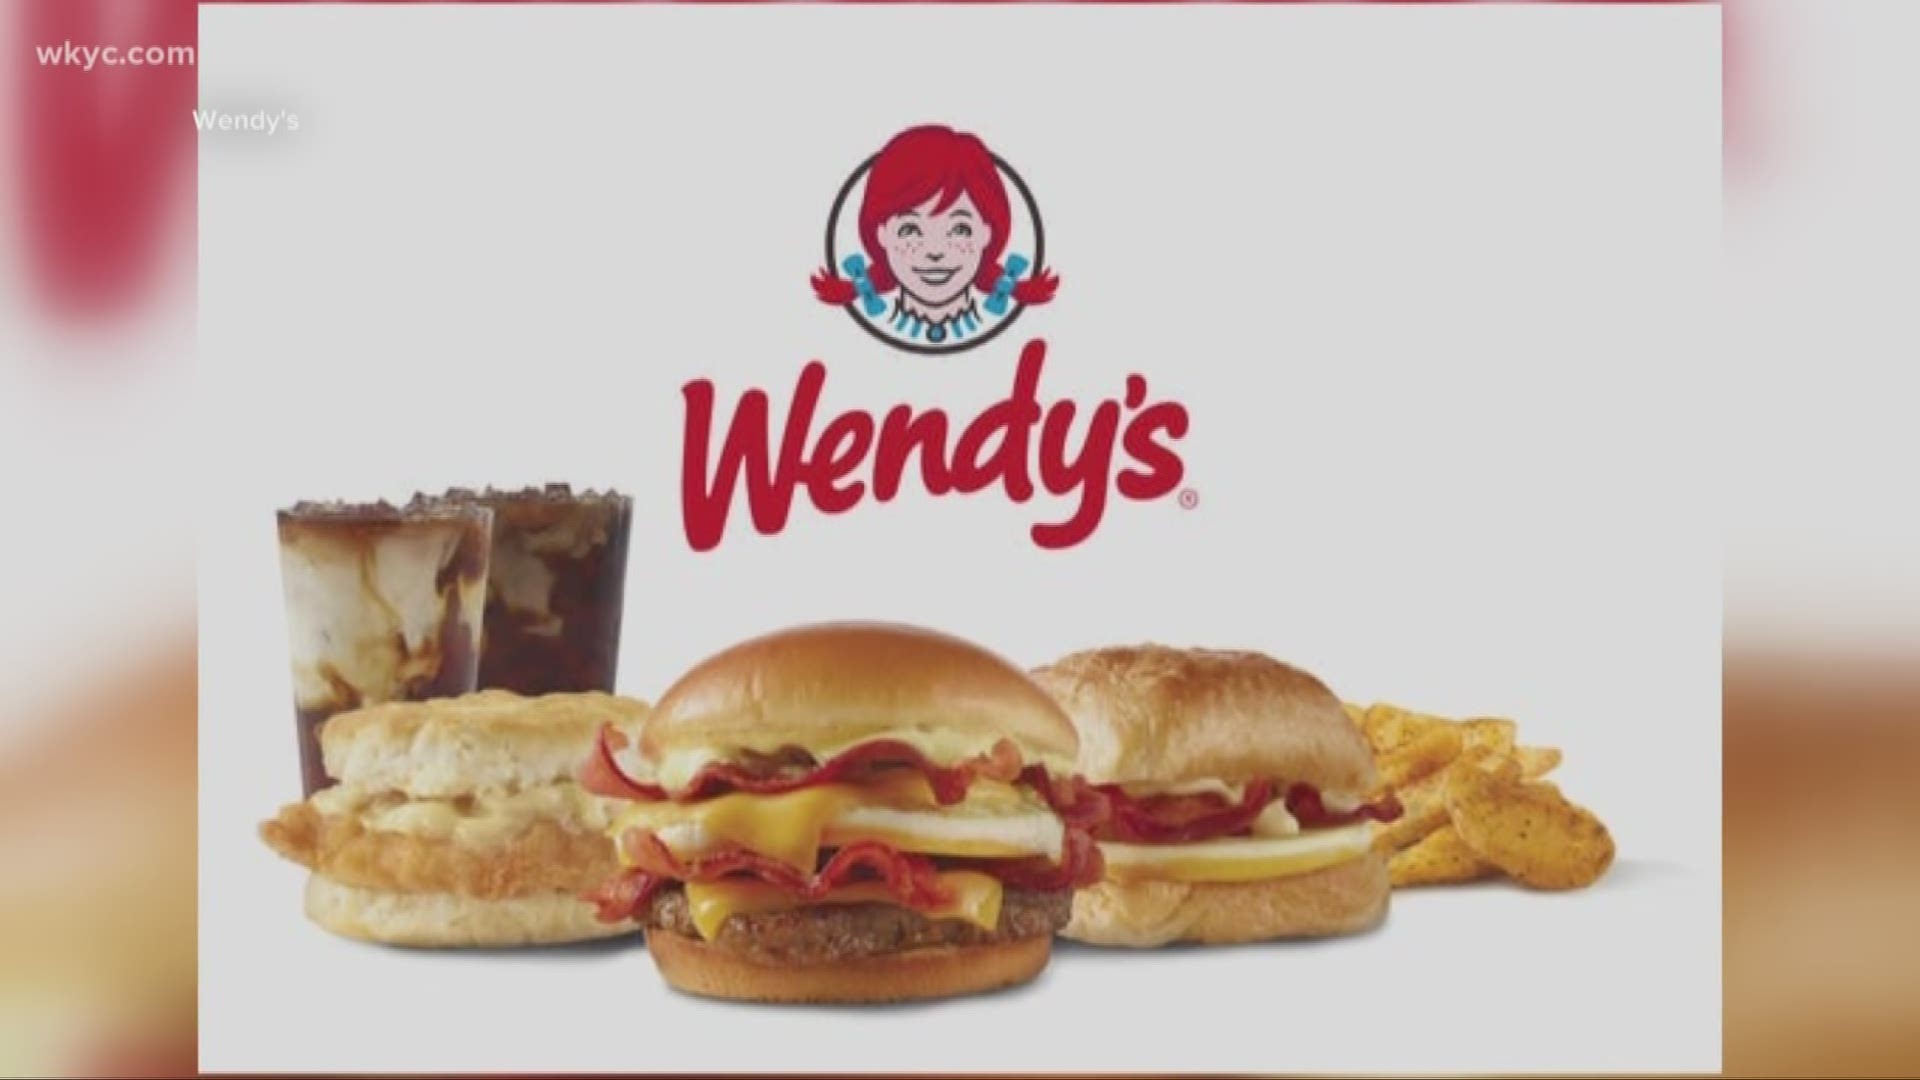 Sept. 10, 2019: Calling all Wendy’s fans. The fast food chain is jumping into the breakfast business by serving up a new morning menu nationwide next year. The breakfast menu’s signature items will include the Breakfast Baconator, Frosty-ccino and Honey Butter Chicken Biscuit.